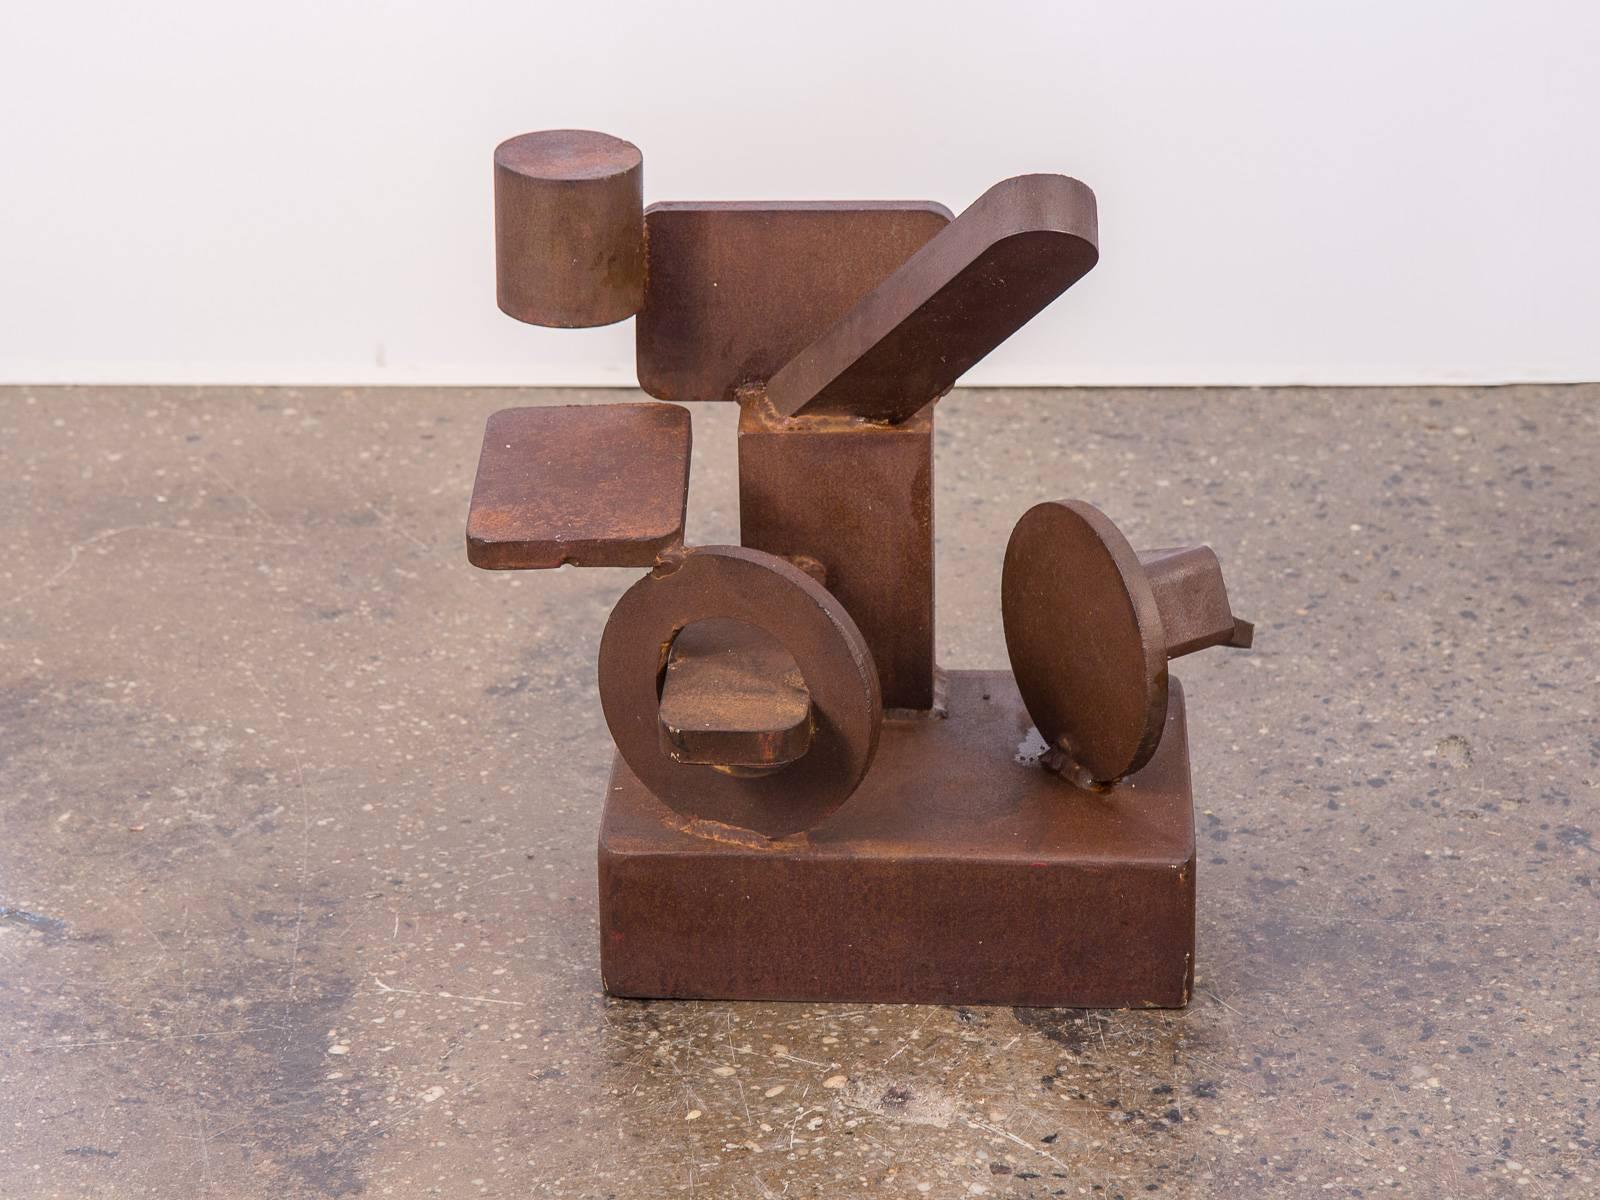 Abstract, 1970s cast steel sculpture. In the style of David Smith. This scale model form is comprised of geometric elements solidly welded to a hefty base. Possibly used as a mock-up for a monumental work. Circles, cylinders, and rectangles float in